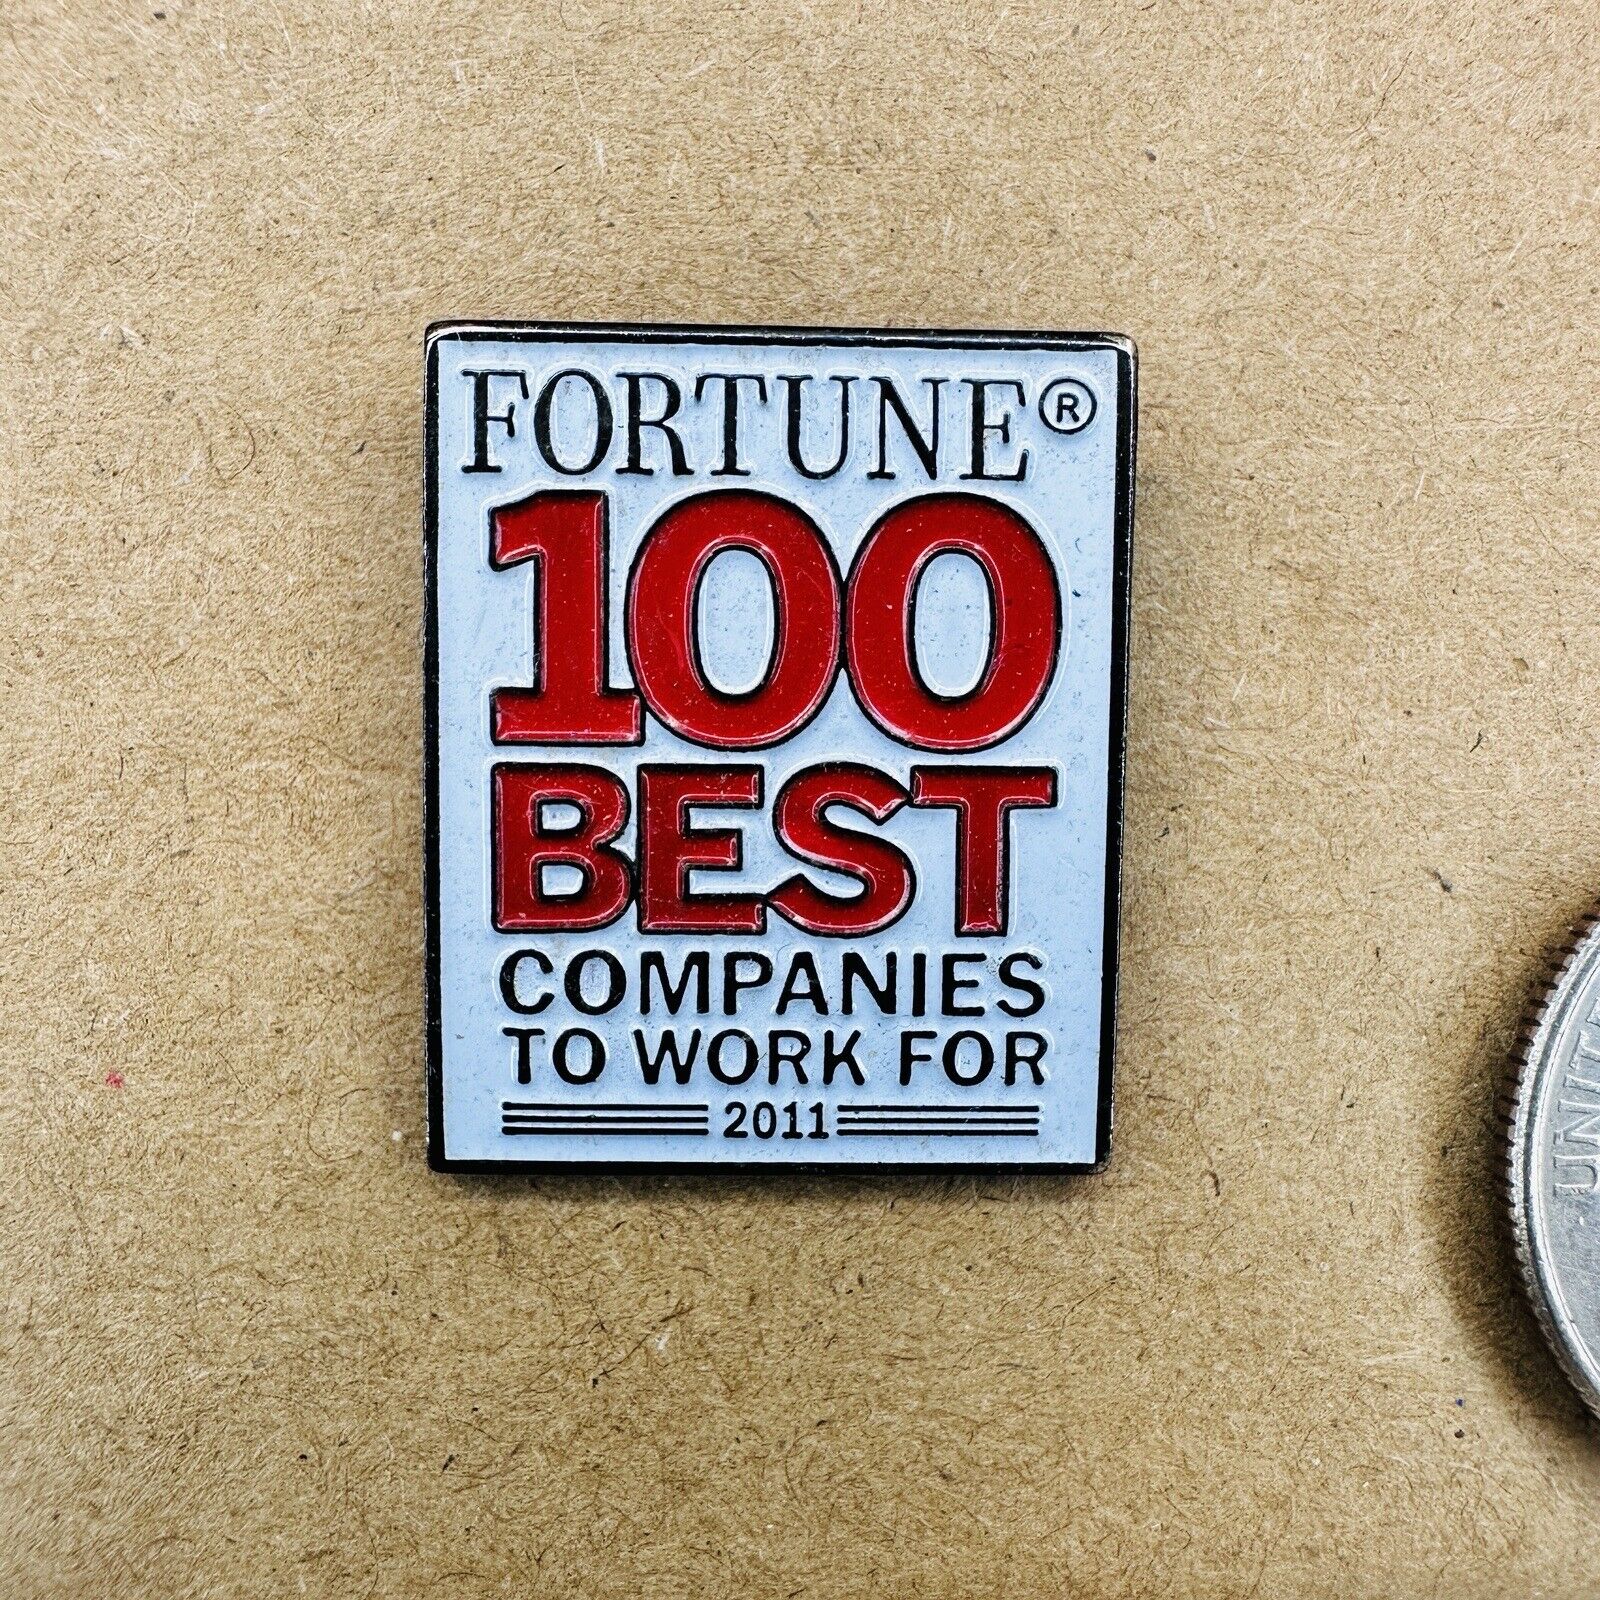 Fortune 100 Best Companies To Work For 2011 Enamel Lapel Pin Hat Tie Tac P120